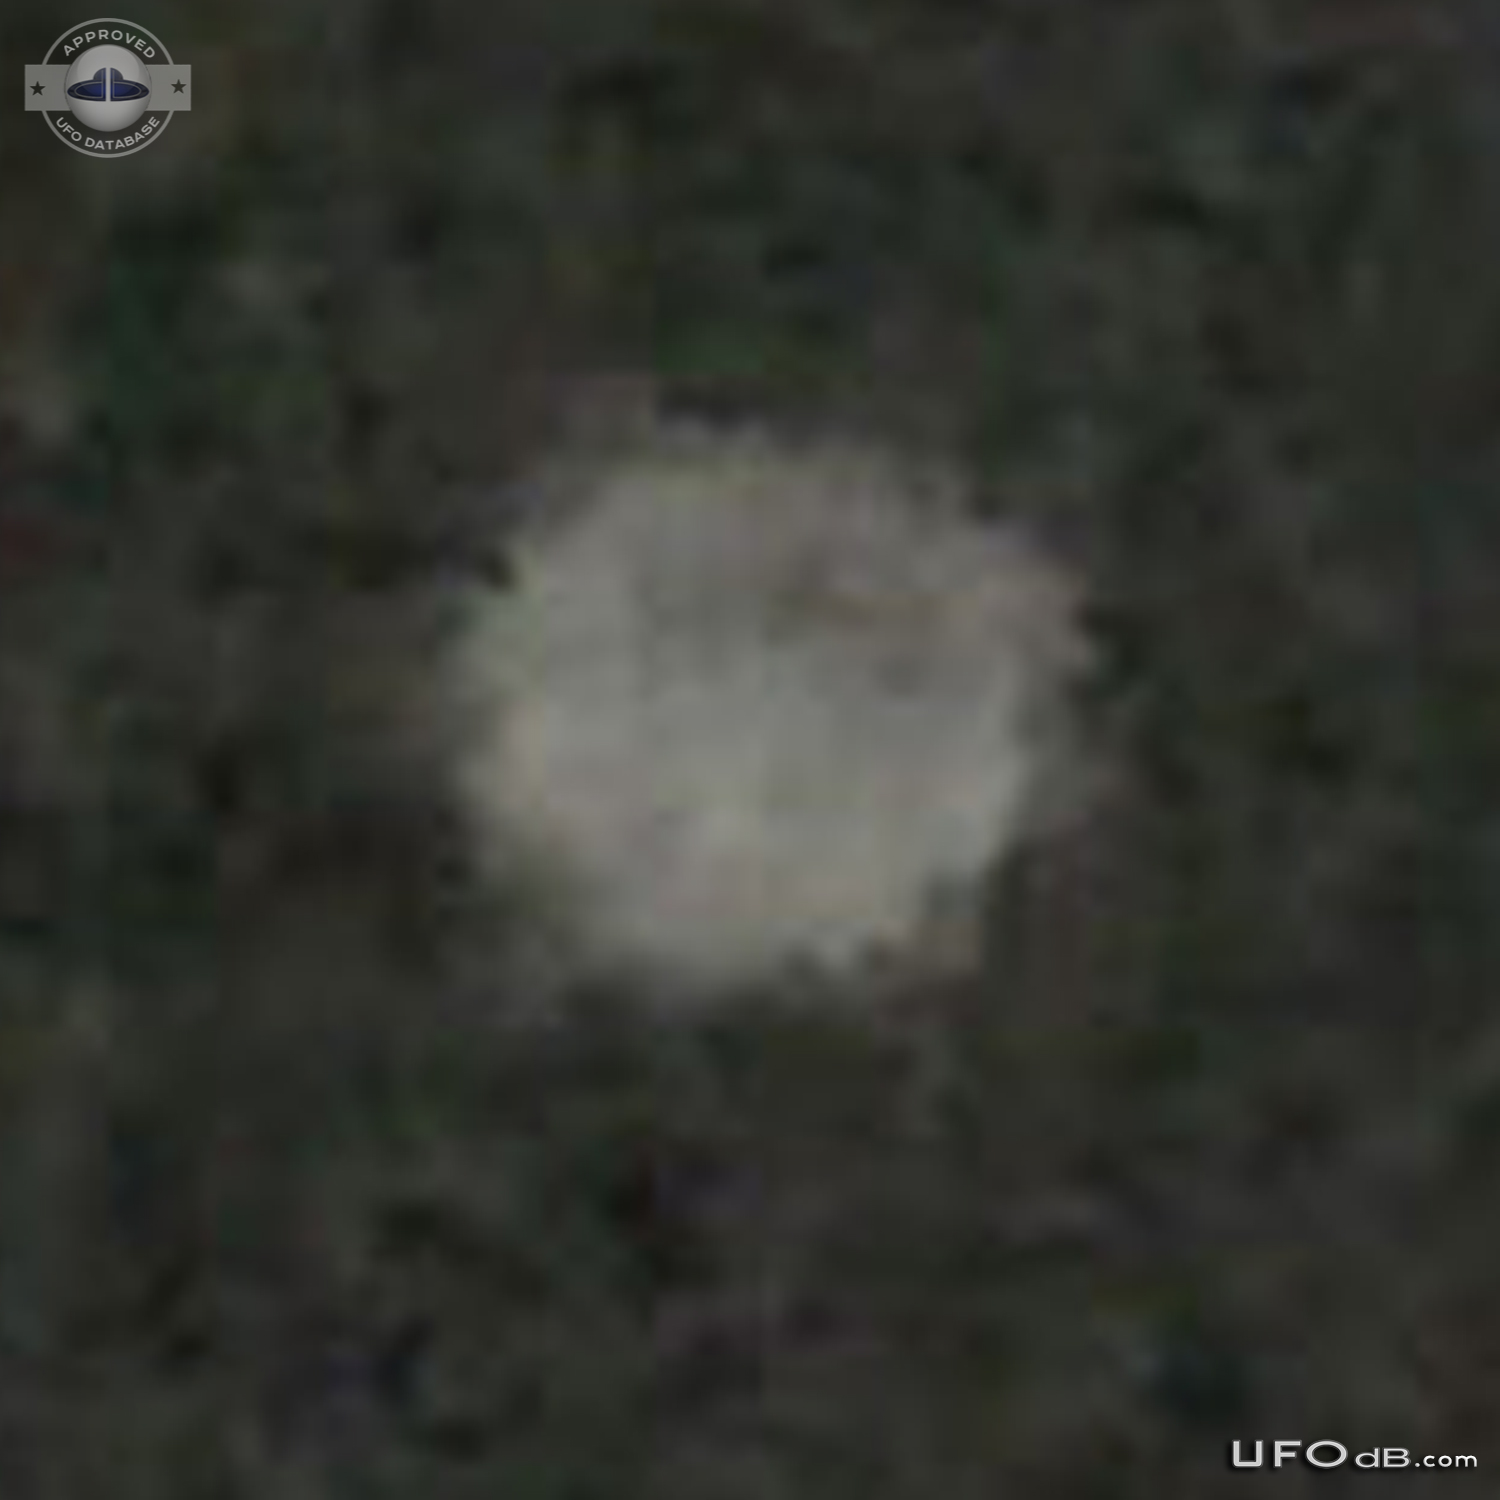 Many hovering UFOs with planes flying around them Weatherford, Texas UFO Picture #619-5